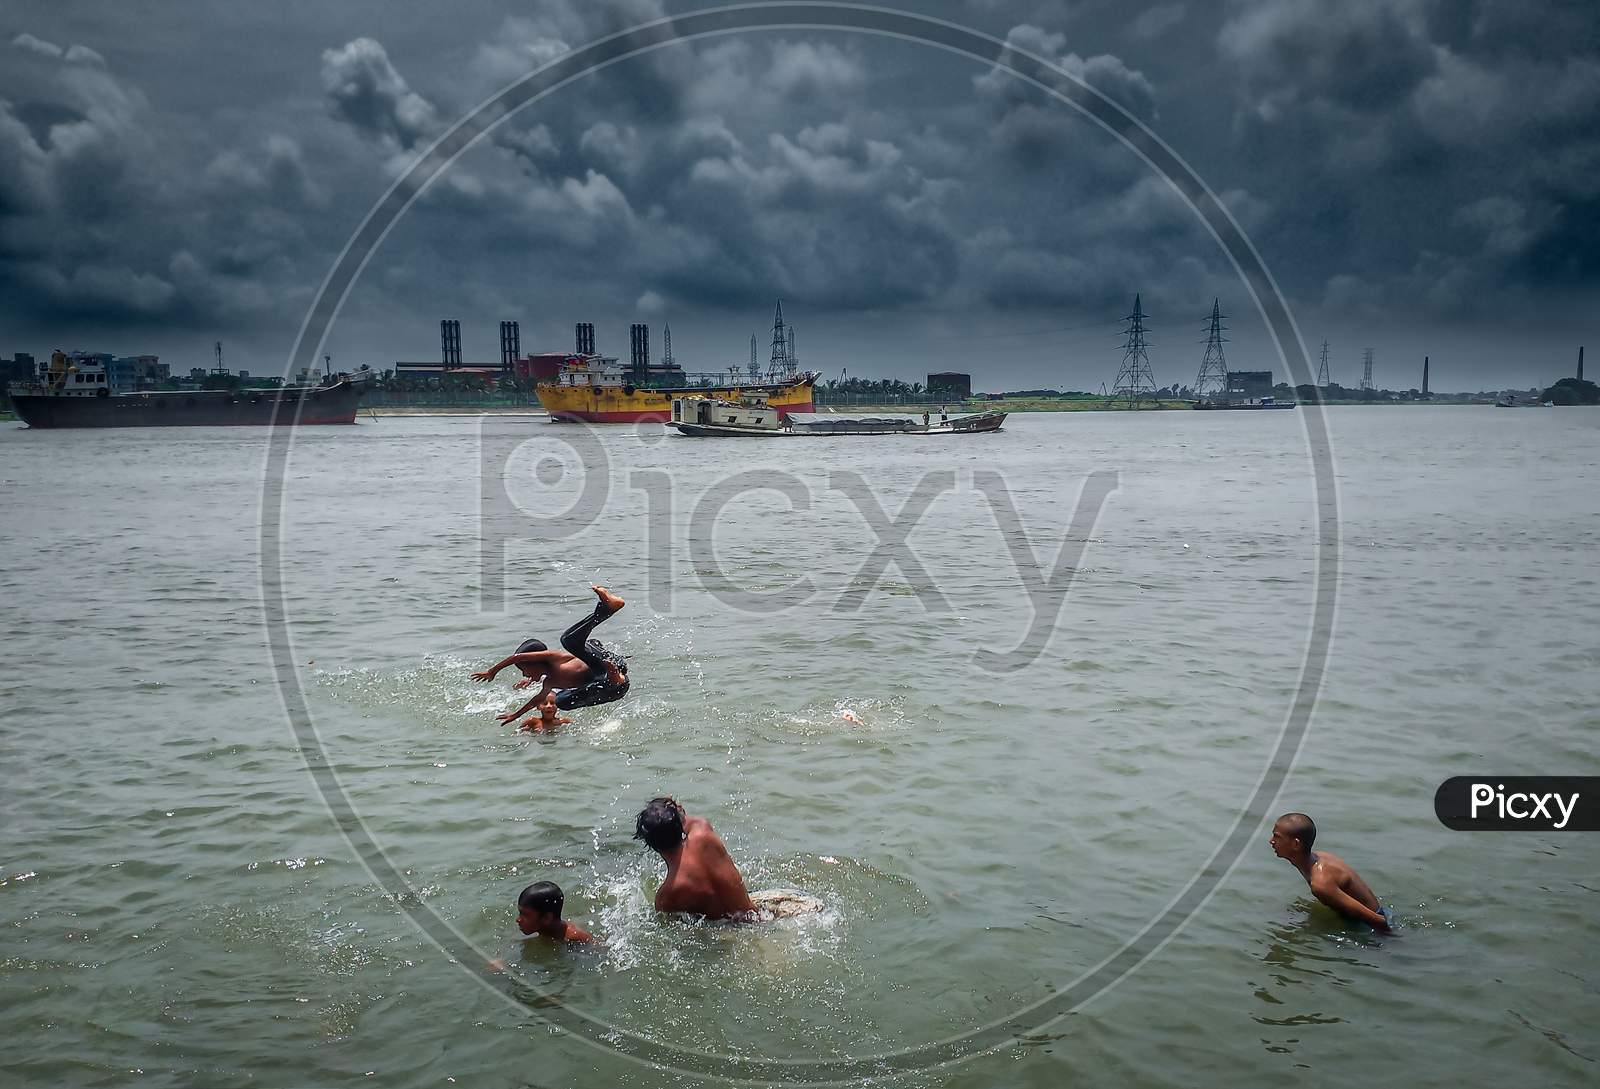 Children Are Enjoying By Jumping In The River Under Beautiful Summer Cloudy Blue Sky . I Captured This Image From Asia, Dhaka, Bangladesh